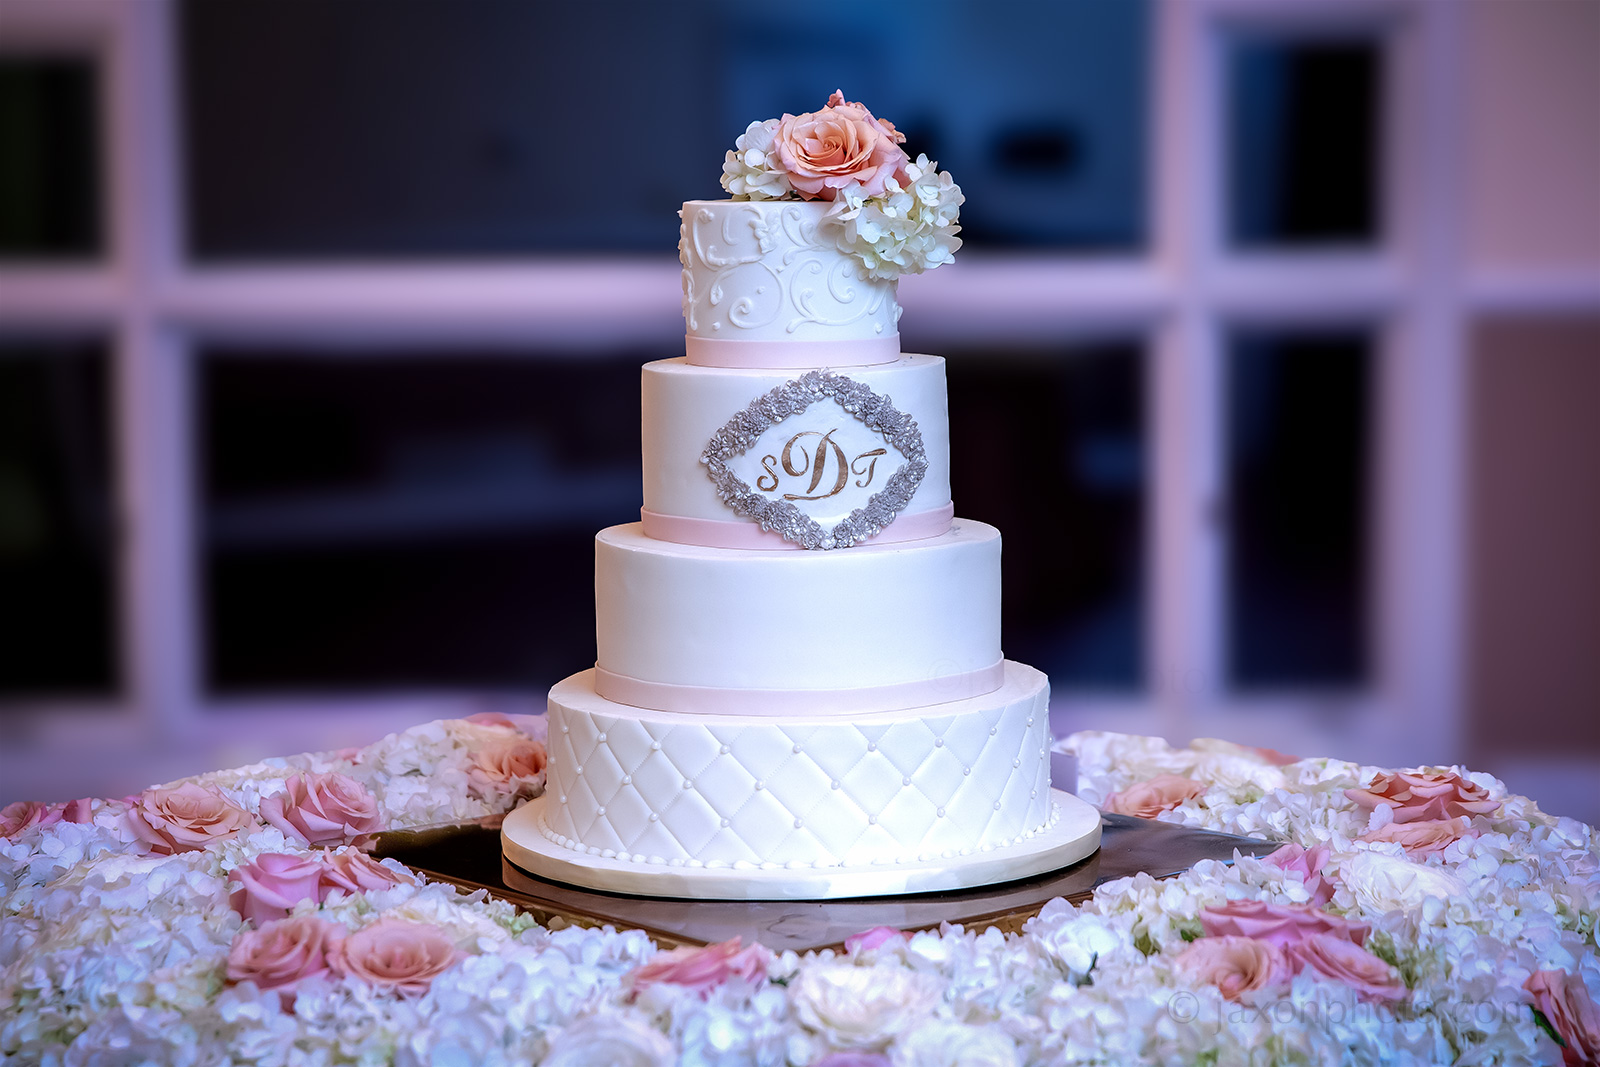 Elegant Four-Tiered White Wedding Cake with Roses and Hydrangeas